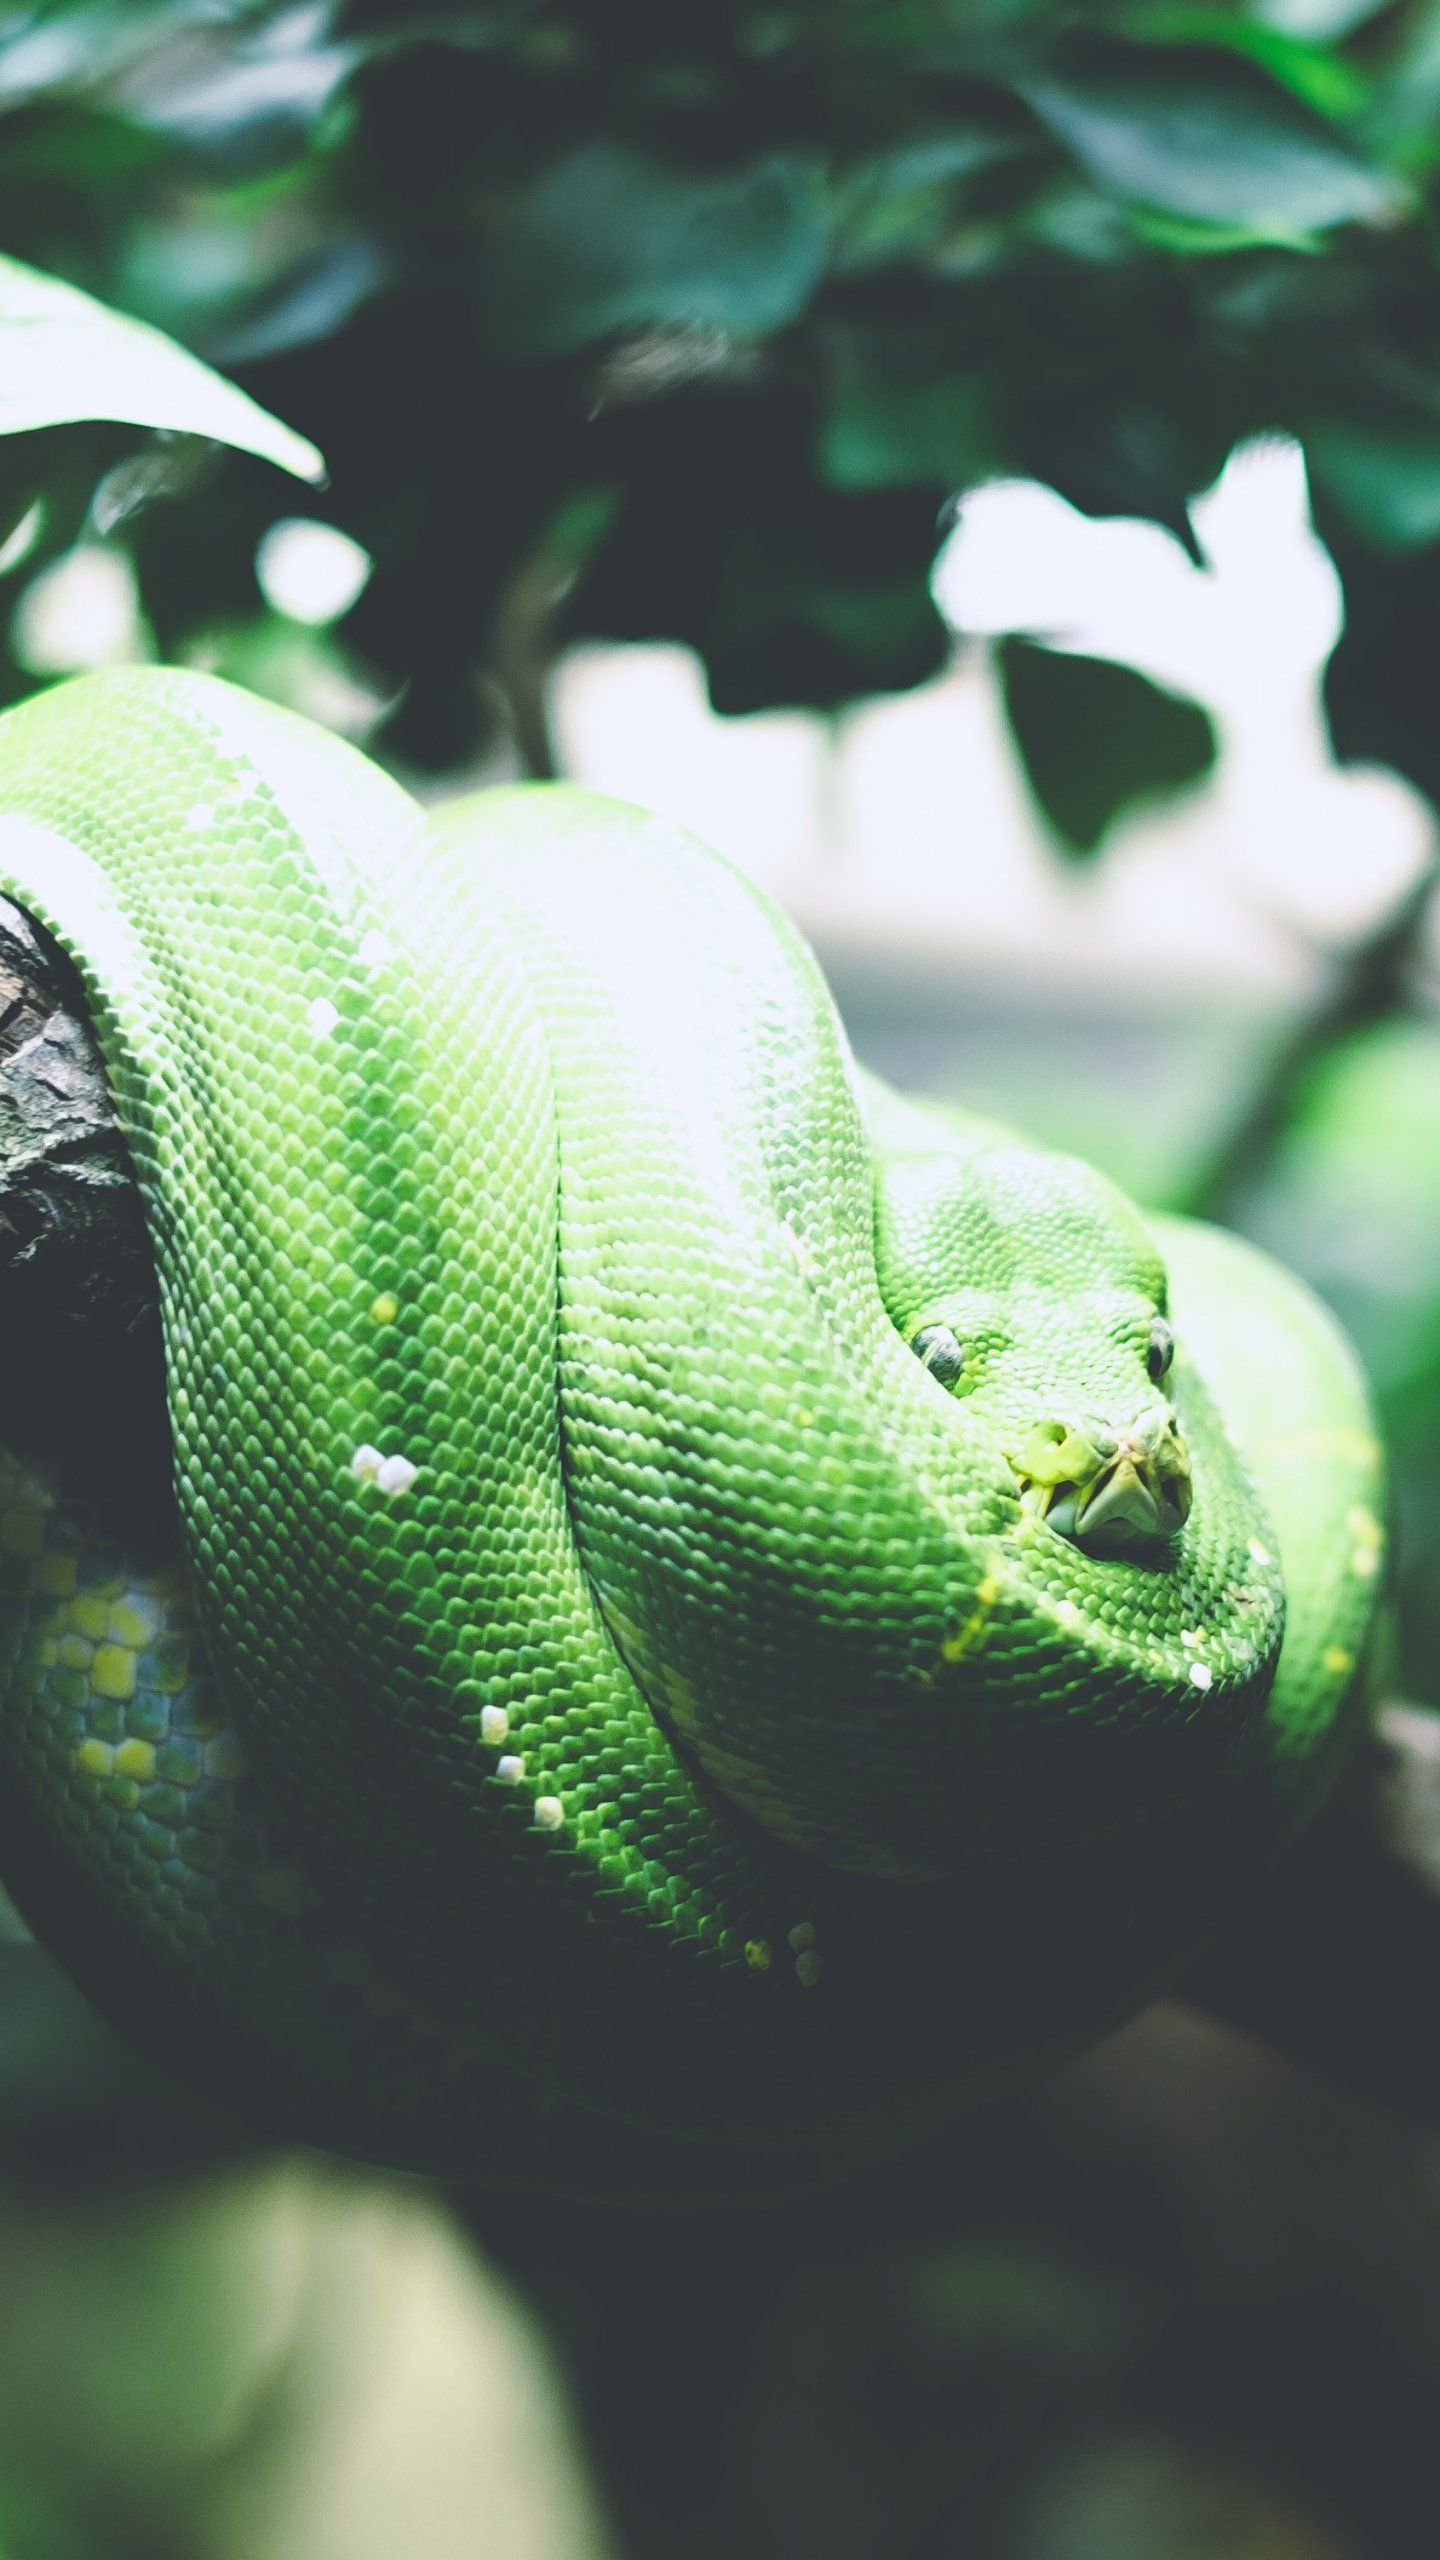 A green snake wrapped around a tree branch. - Snake